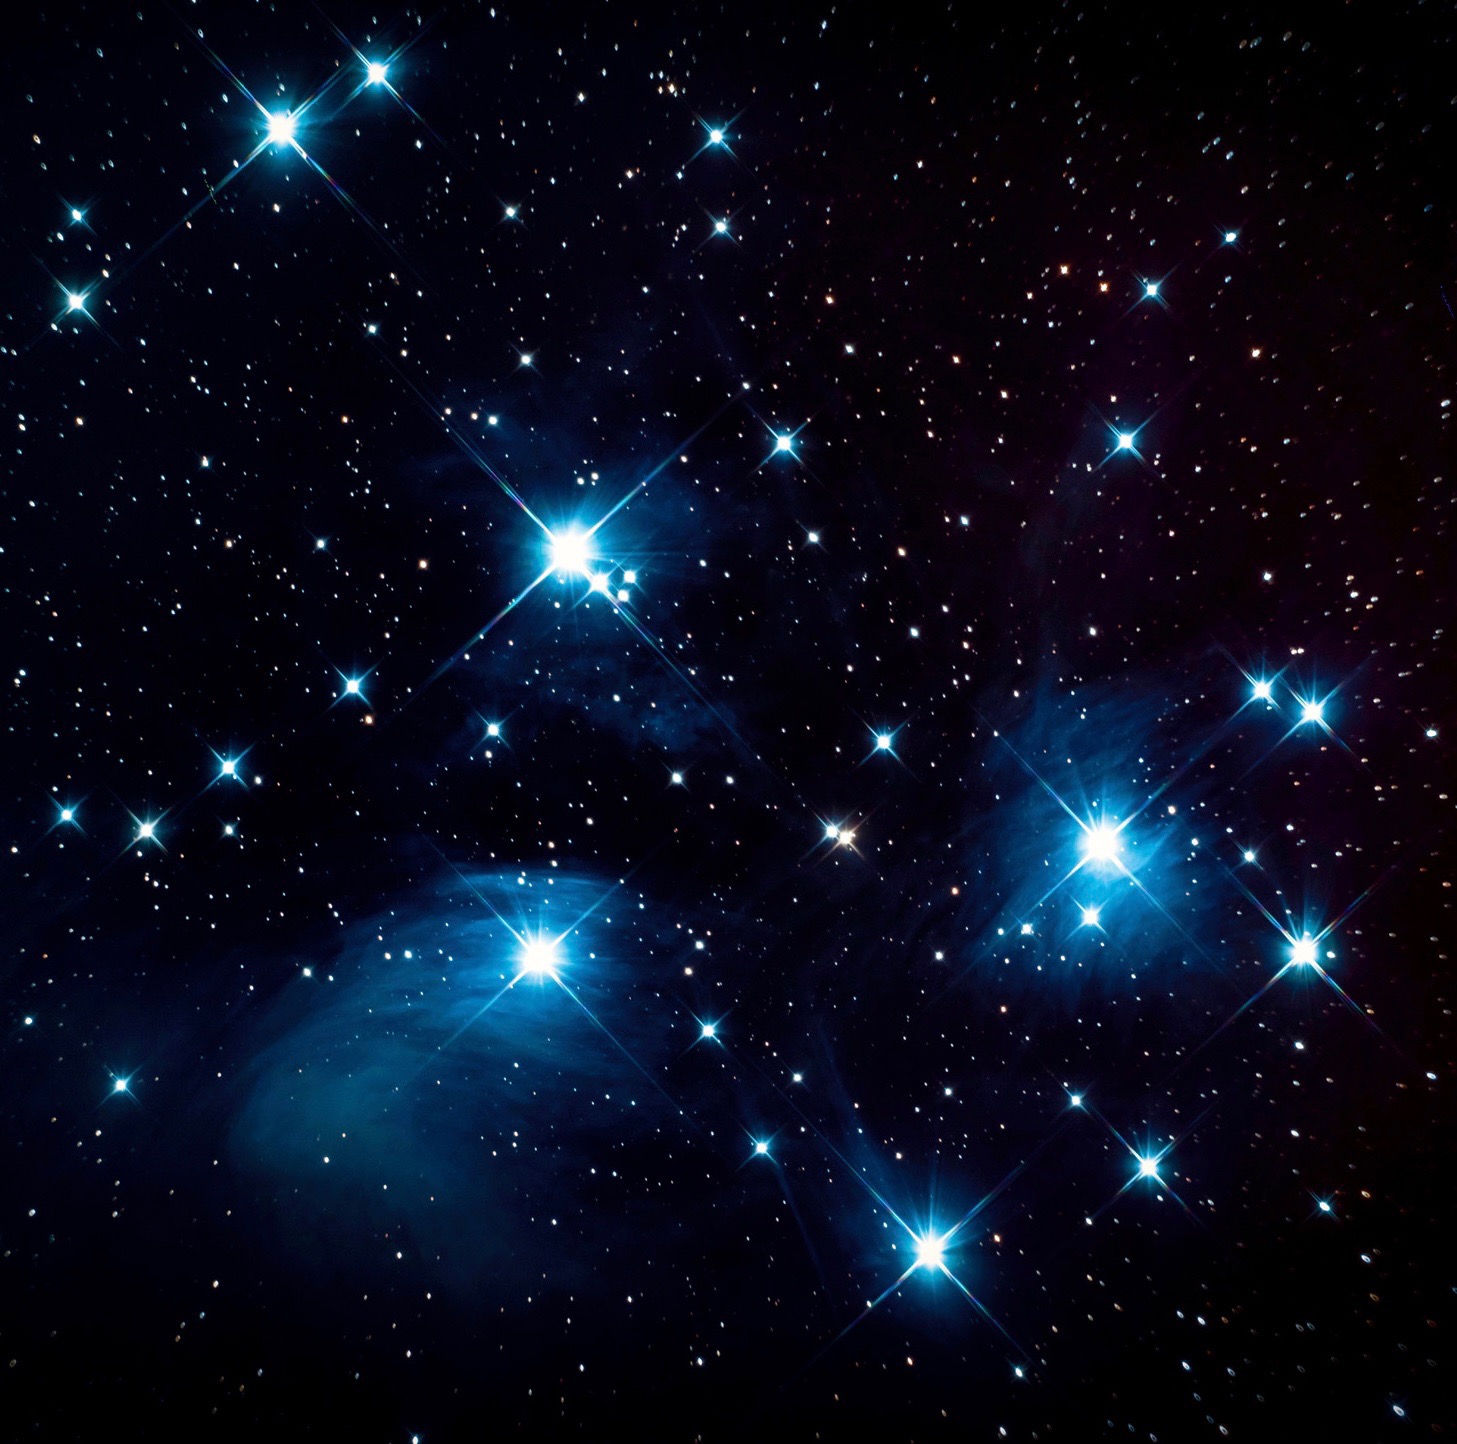 “The Pleiades”, Named after Greek God,also known as “Clusters of Seven Sisters”. This is an open star cluster, meaning group of stars that were born around the same time from gigantic clouds of gas and dust.The stars glow hot blue and form within last 100 million years.